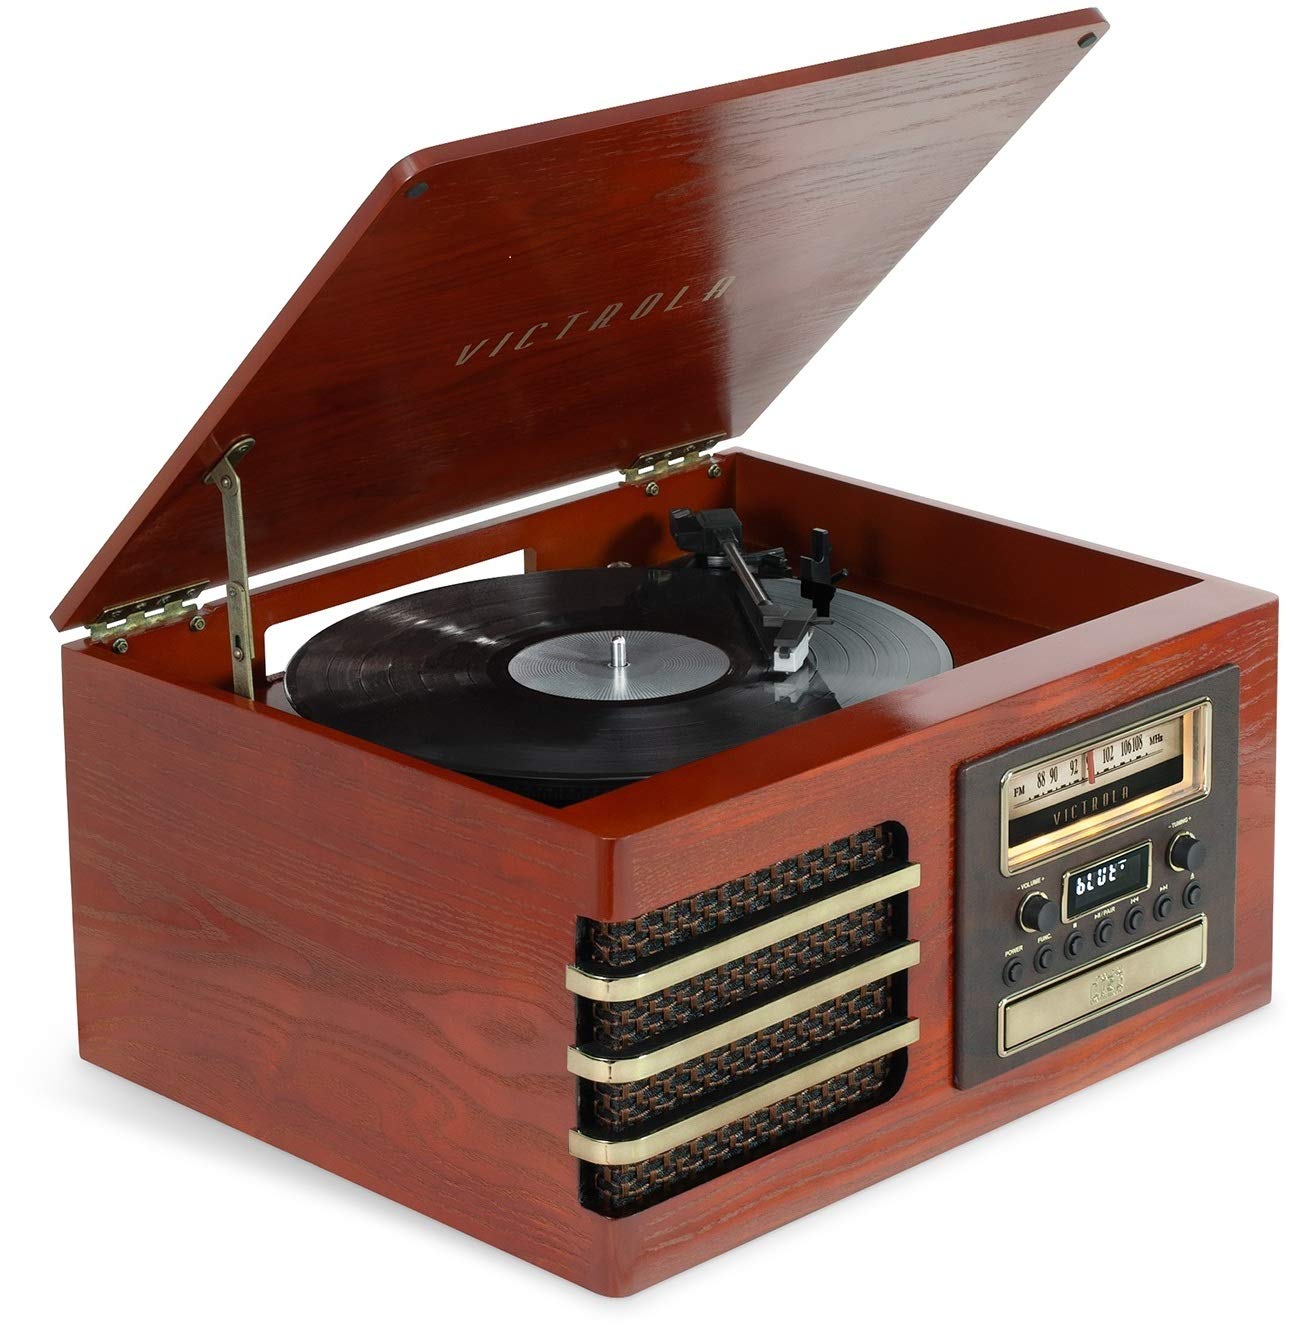 Victrola Ellington Bluetooth Record Player with 3-Speed Turntable, FM Radio, CD Player, Cassette Player, Aux/Headphone Jack, Solid Wood Construction, Built-in Speaker